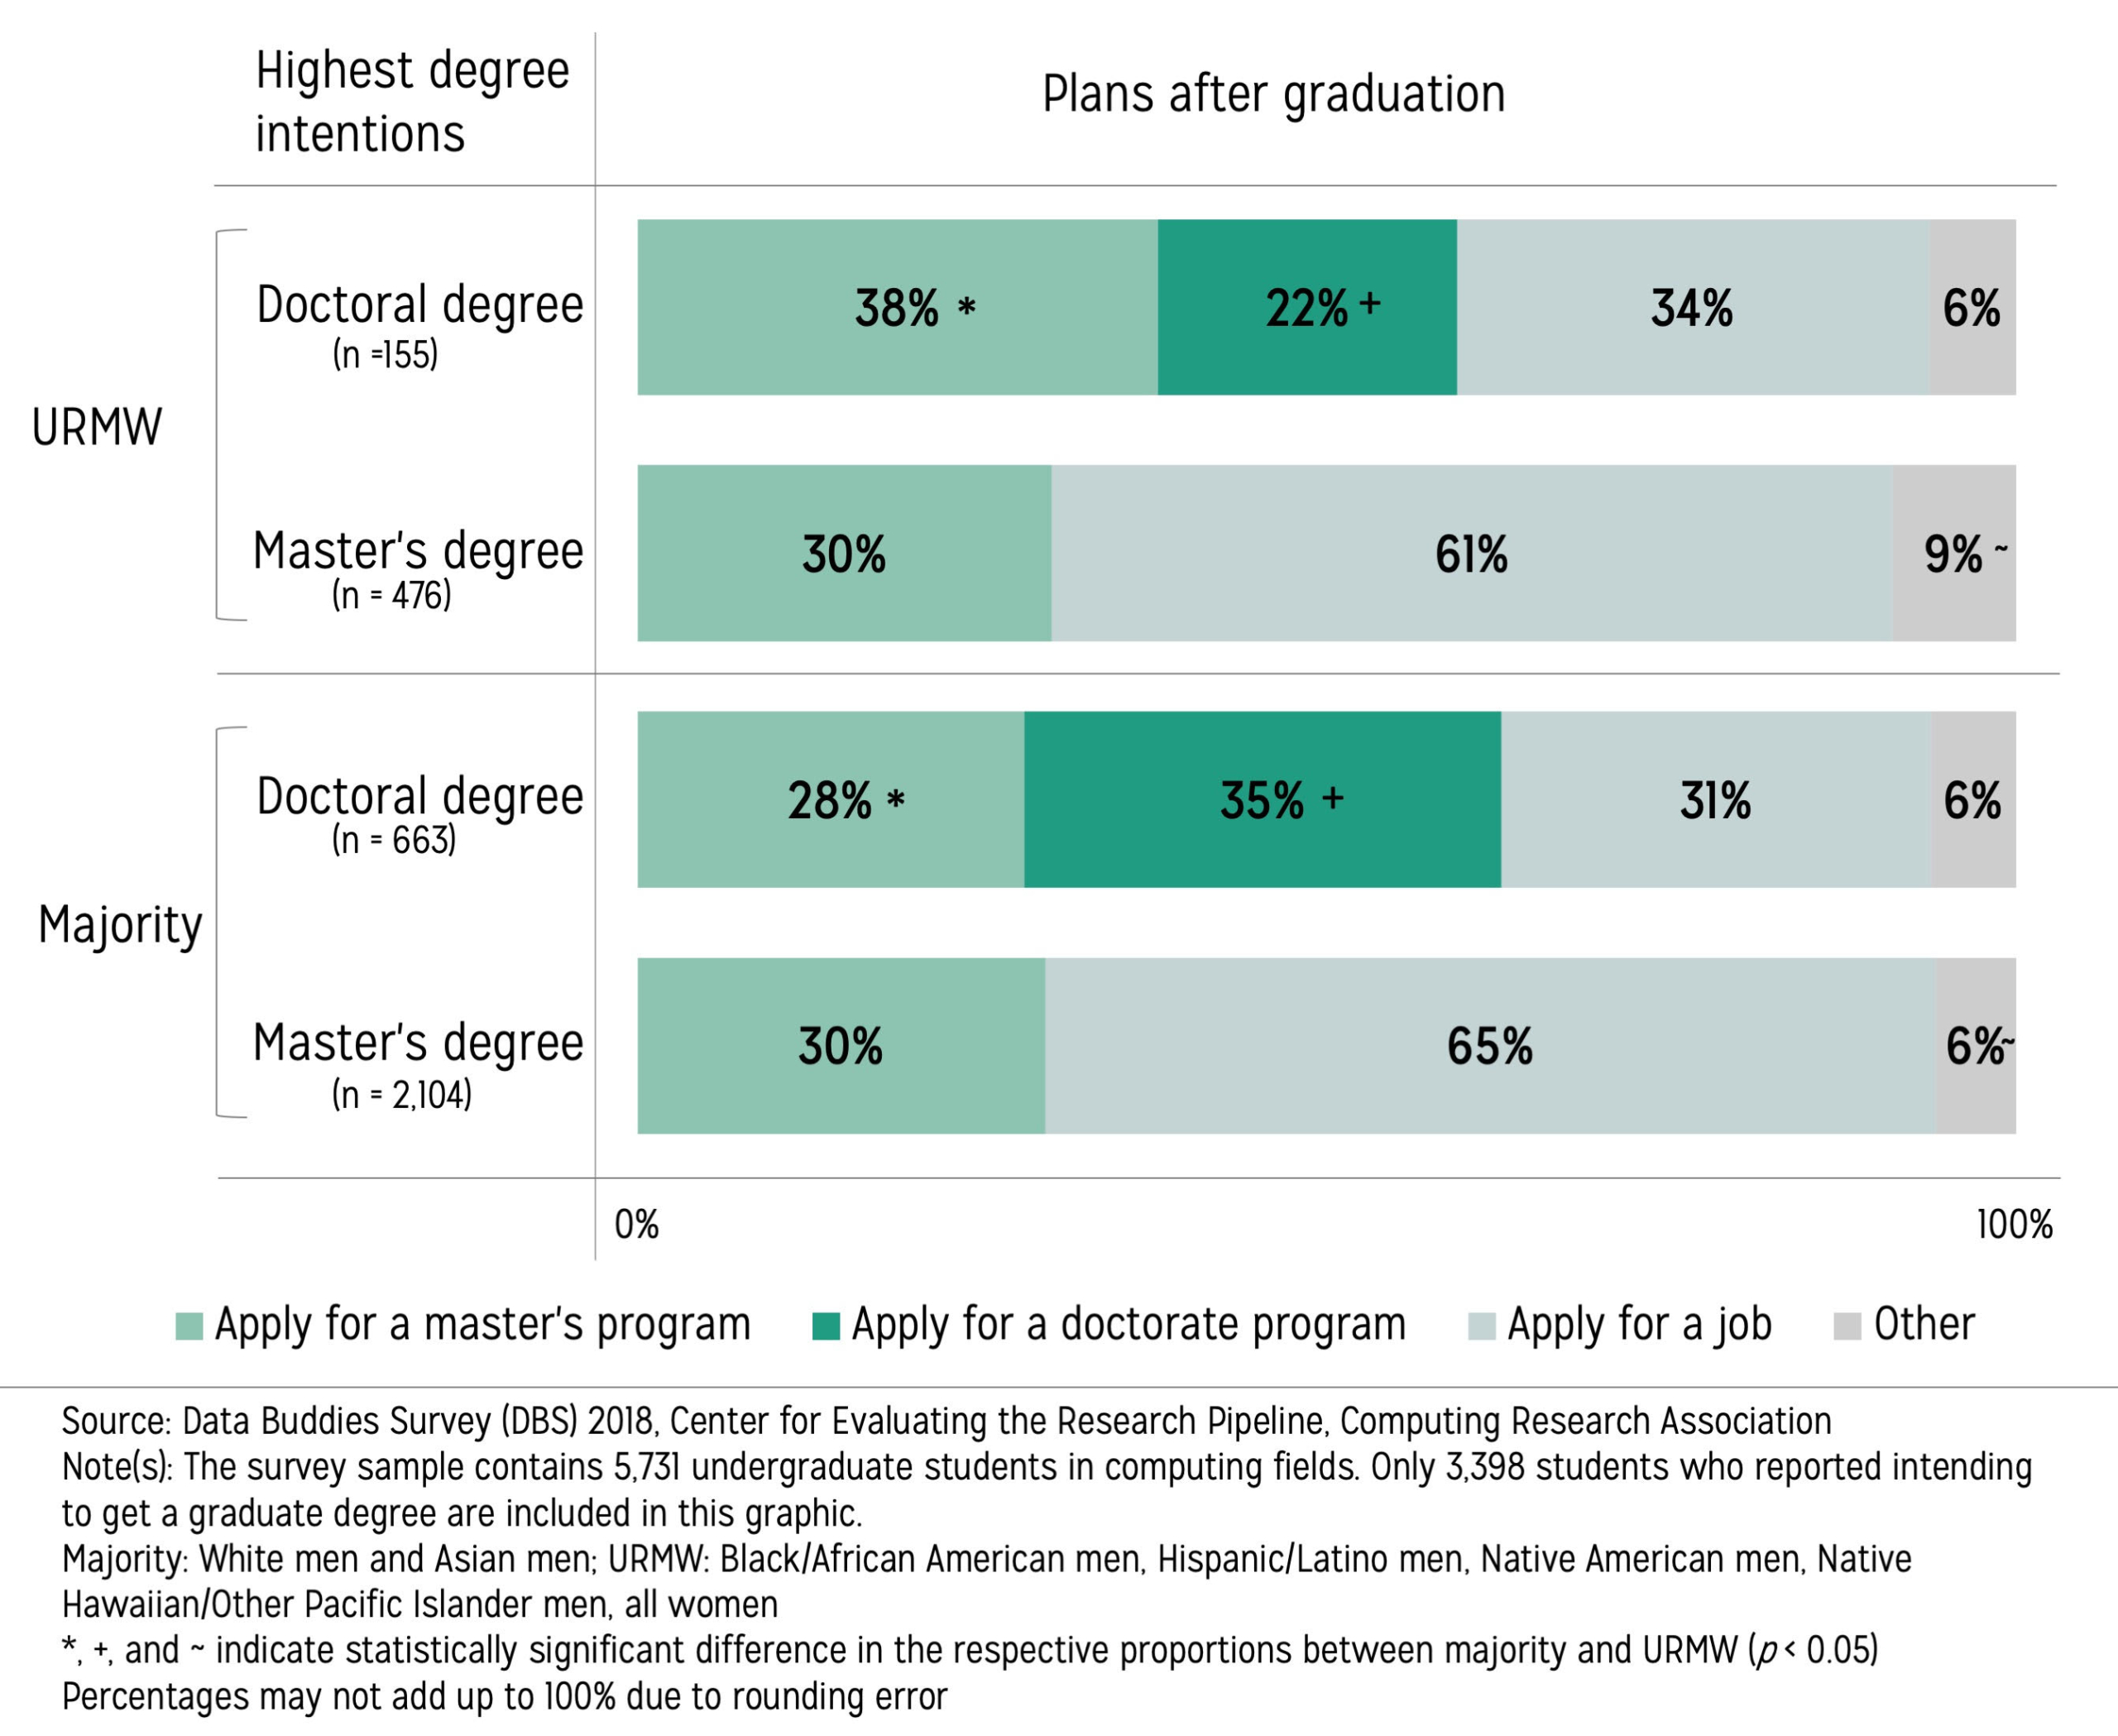 Horizontal bars showing percentages of undergraduate students’ immediate plans after graduation by their highest degree intentions and underrepresented minority status.